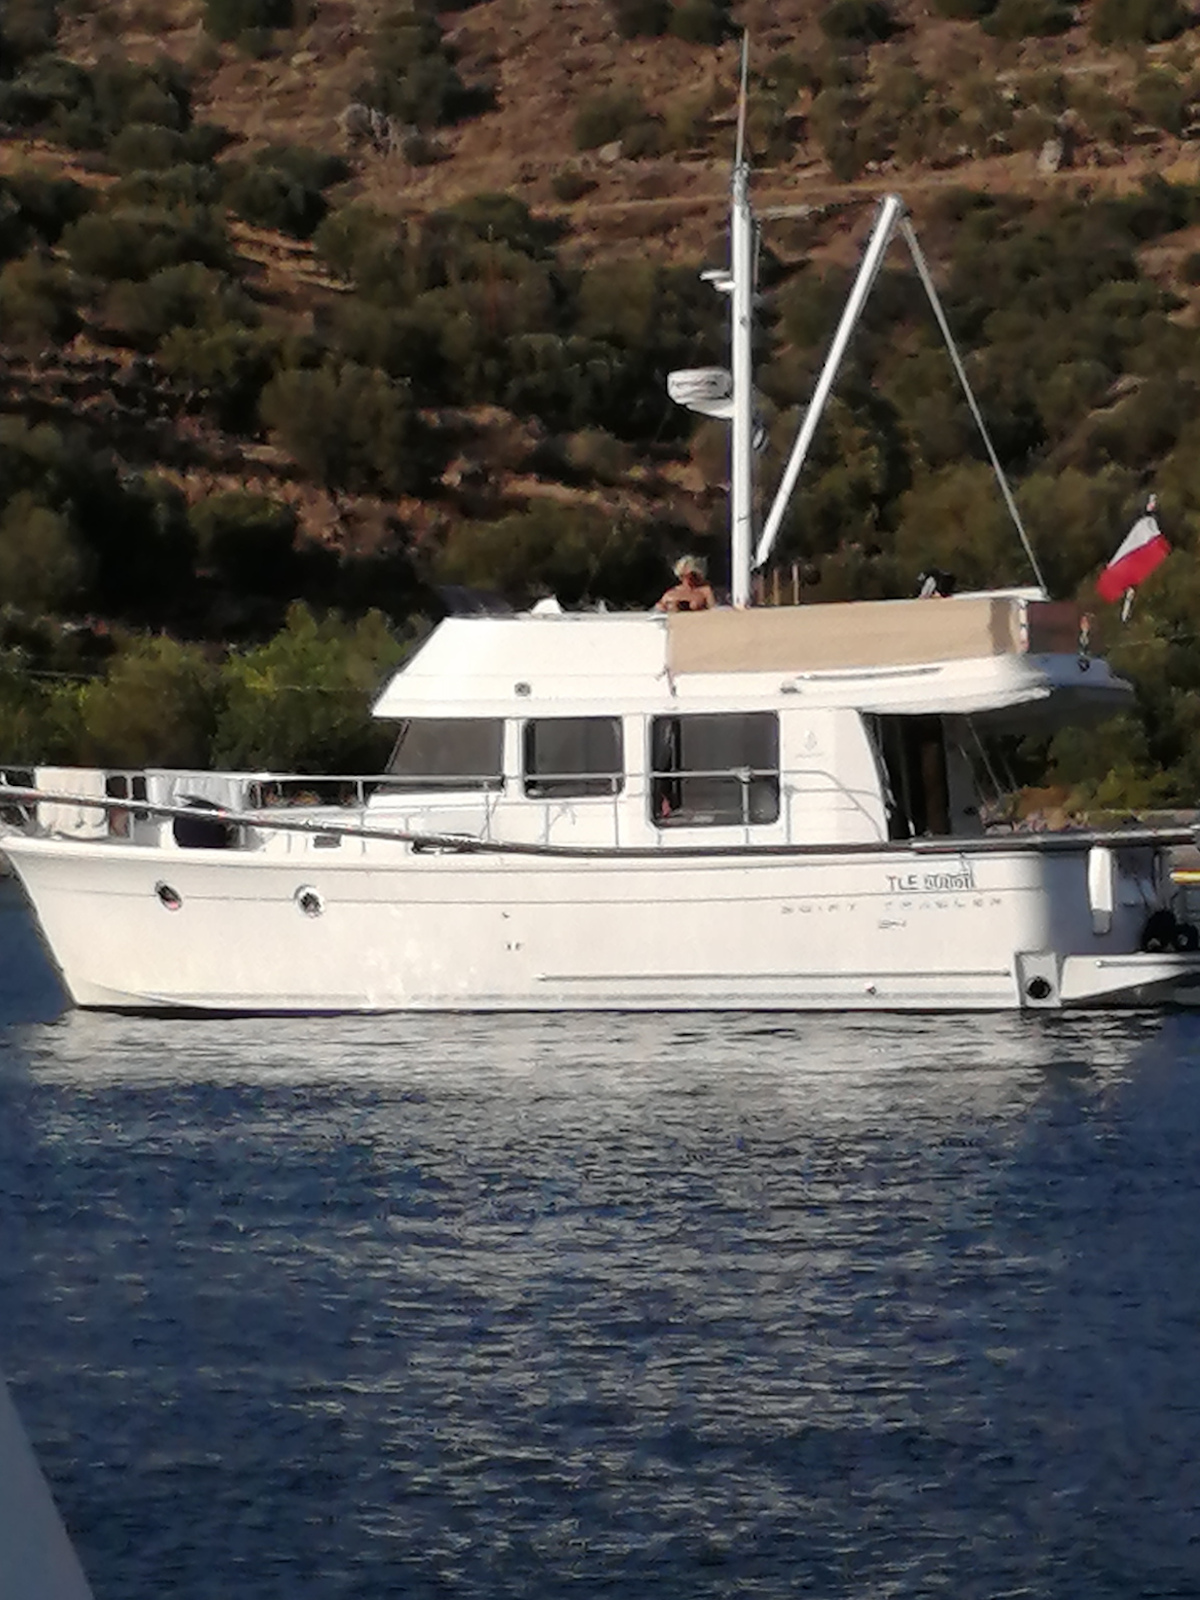 images%20cyclades%202021/11.jpg